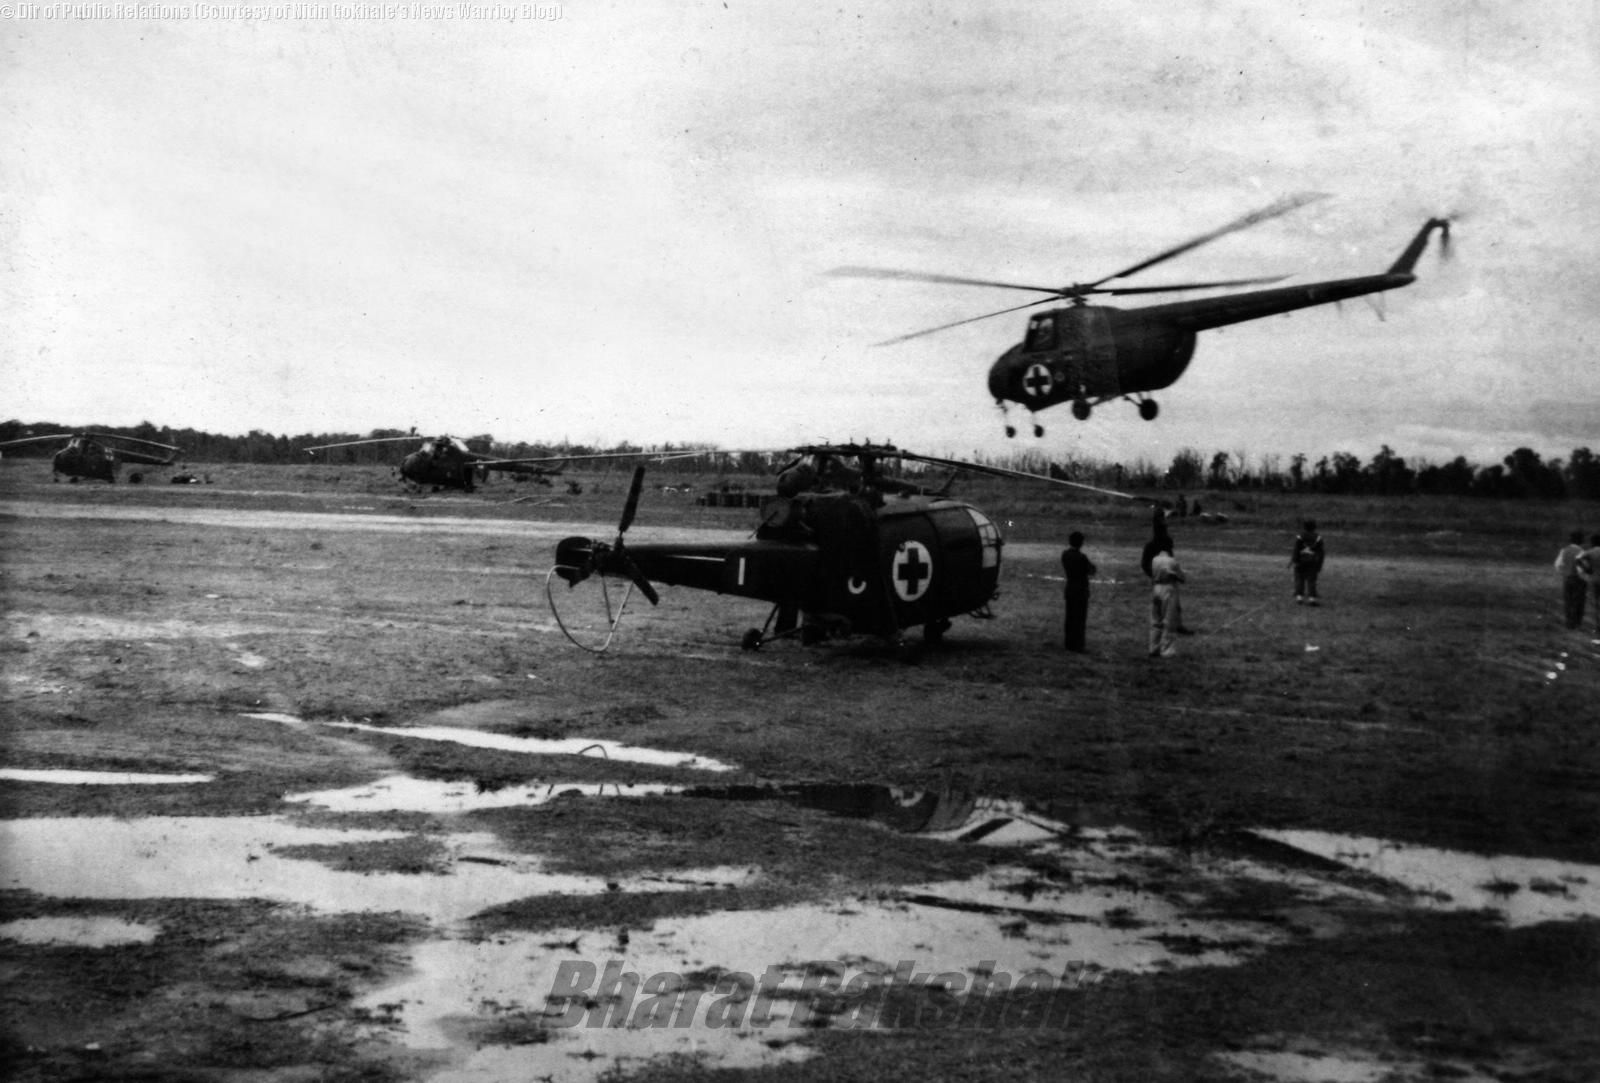 An Allouette III during the evacuation